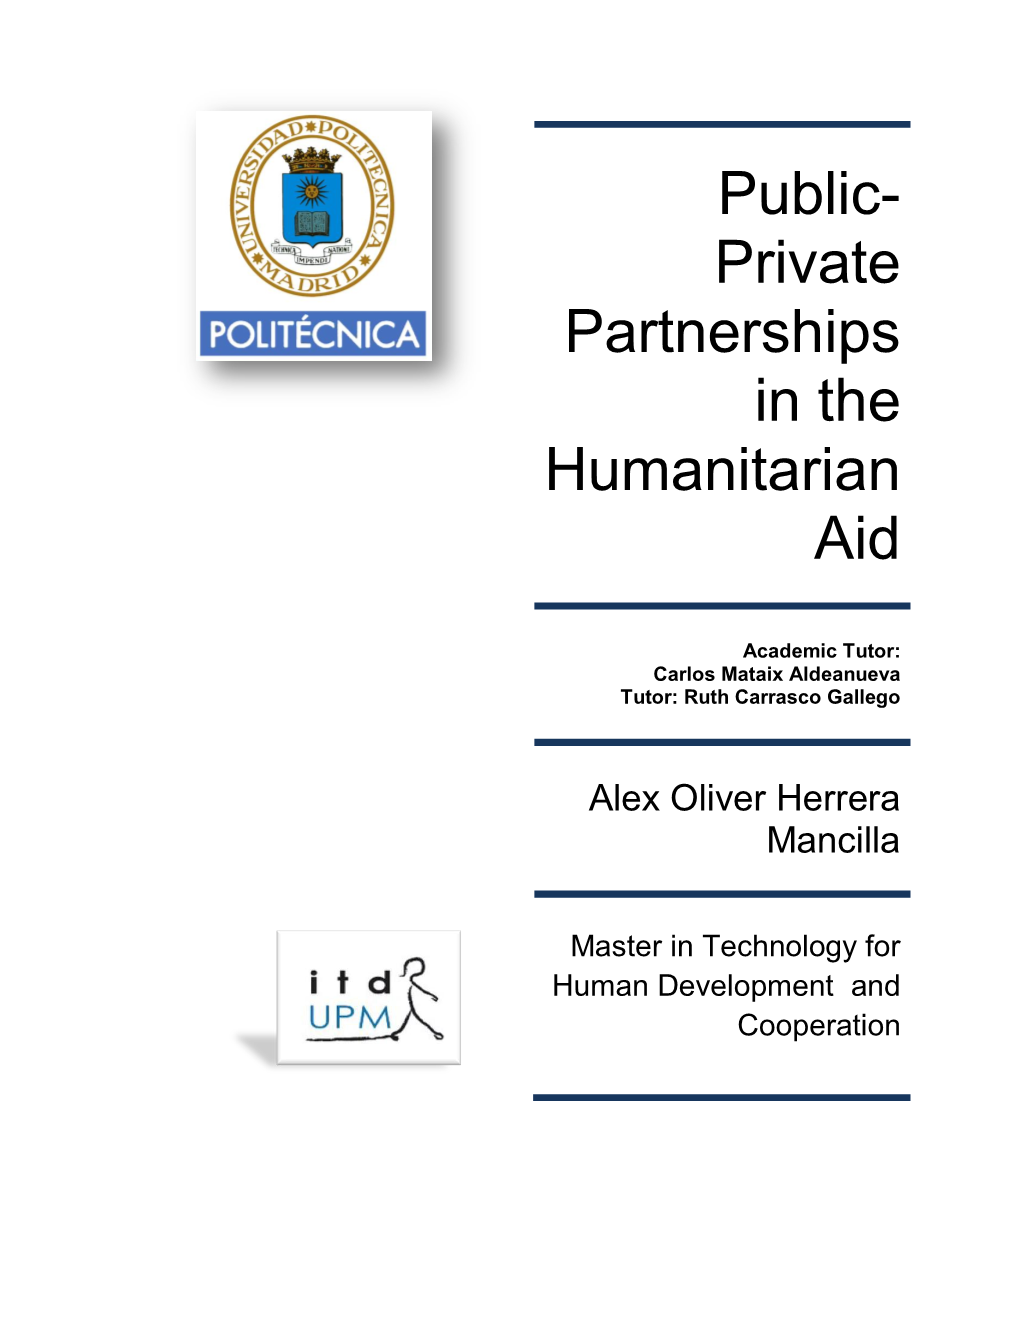 Public-Private Partnerships in the Humanitarian Aid Context (PPPH)